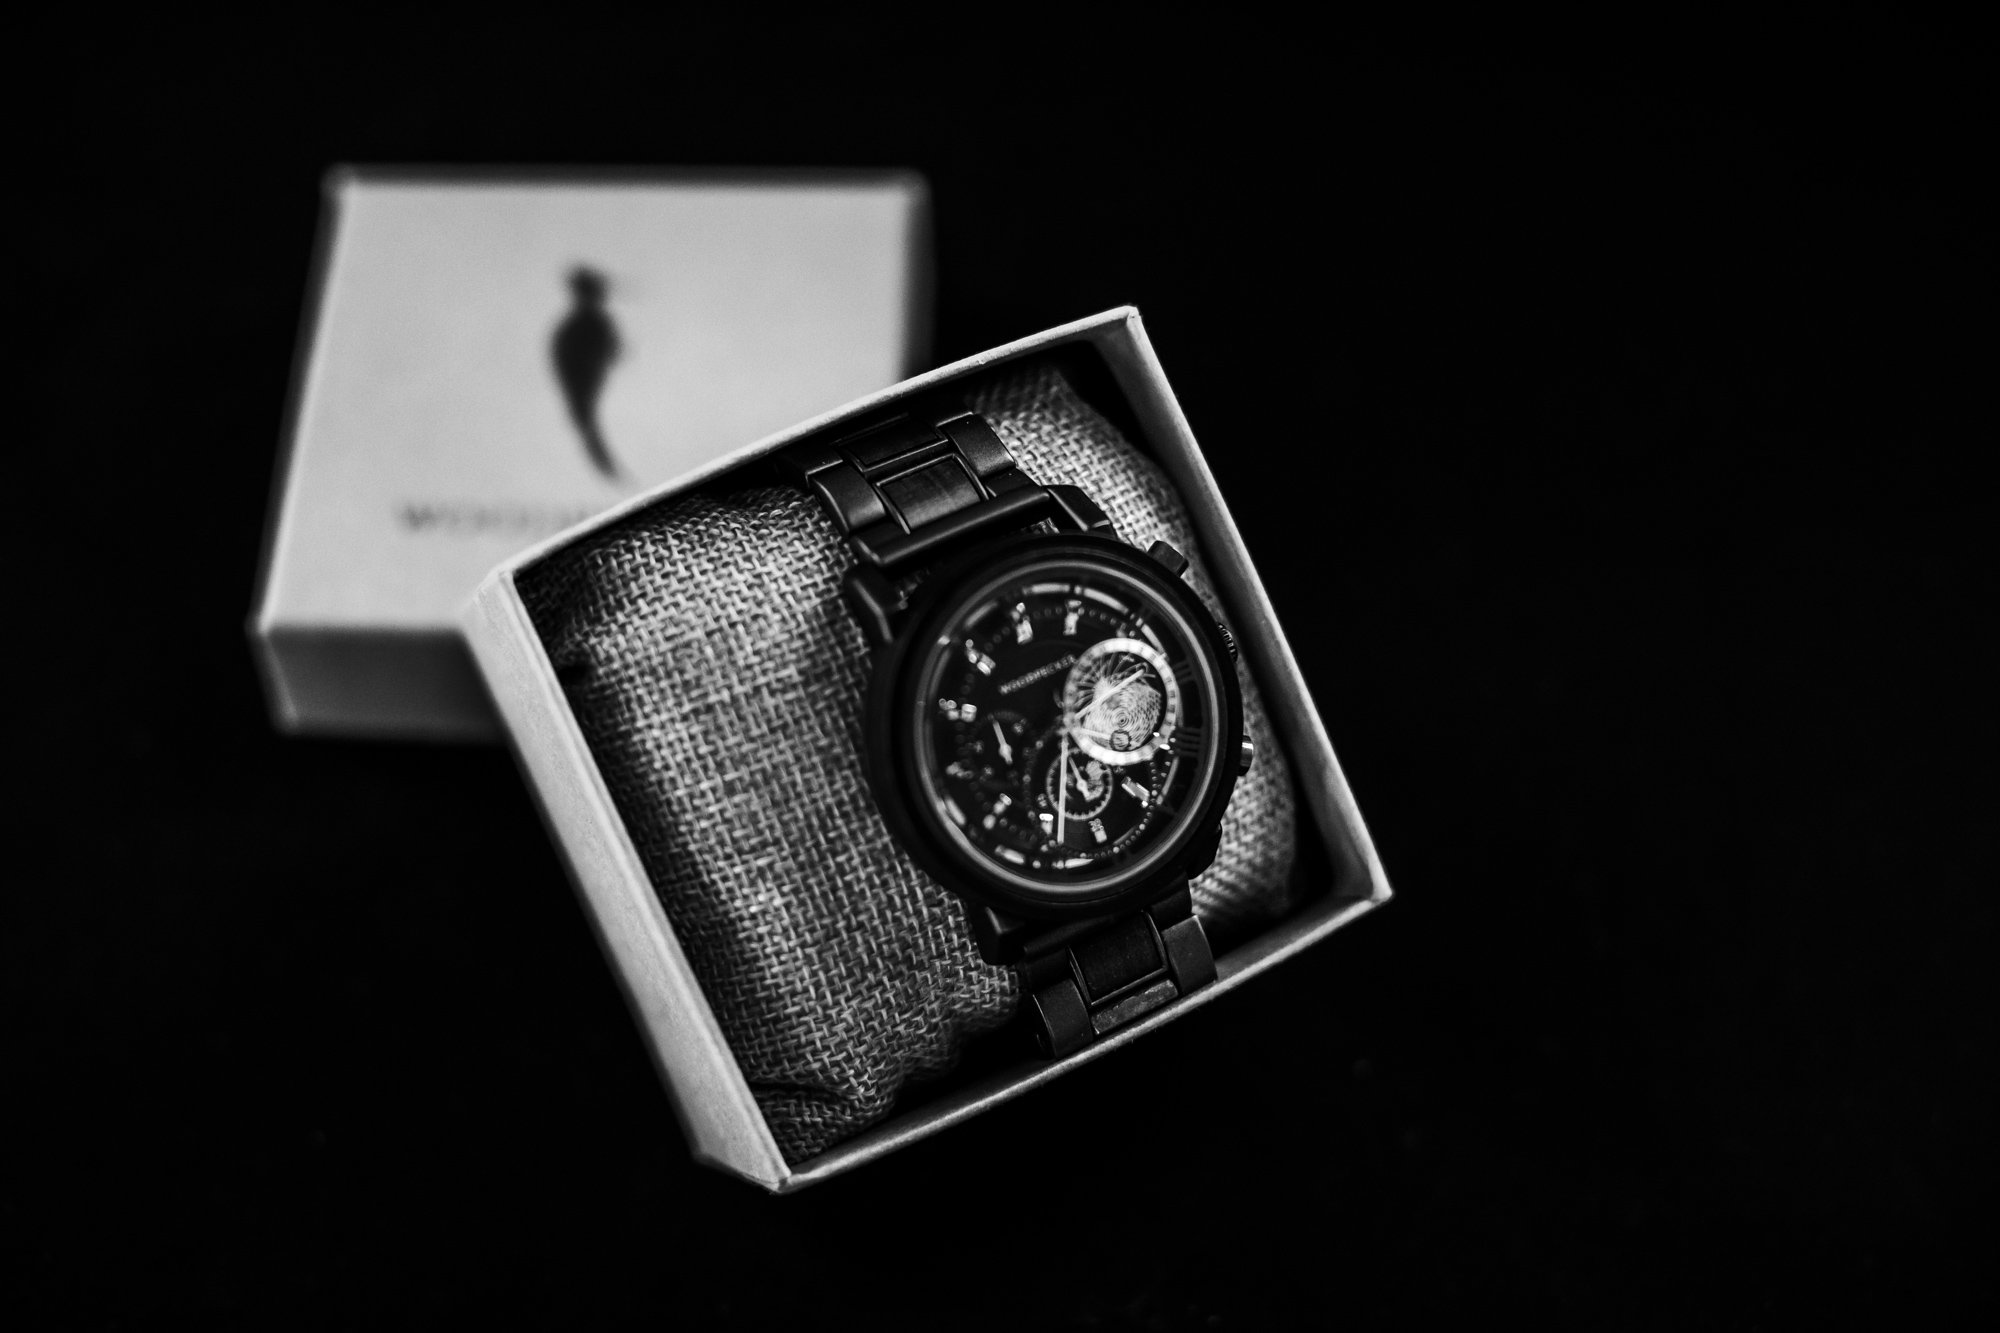  Details of a men’s watch in black and white for the wedding day by Teala Ward Photography. wedding day details #TealaWardPhotography #TealaWardWeddings #WeddingLocationsIllinois #IllinoisWedding #weddingdetails #weddingphotography #married 